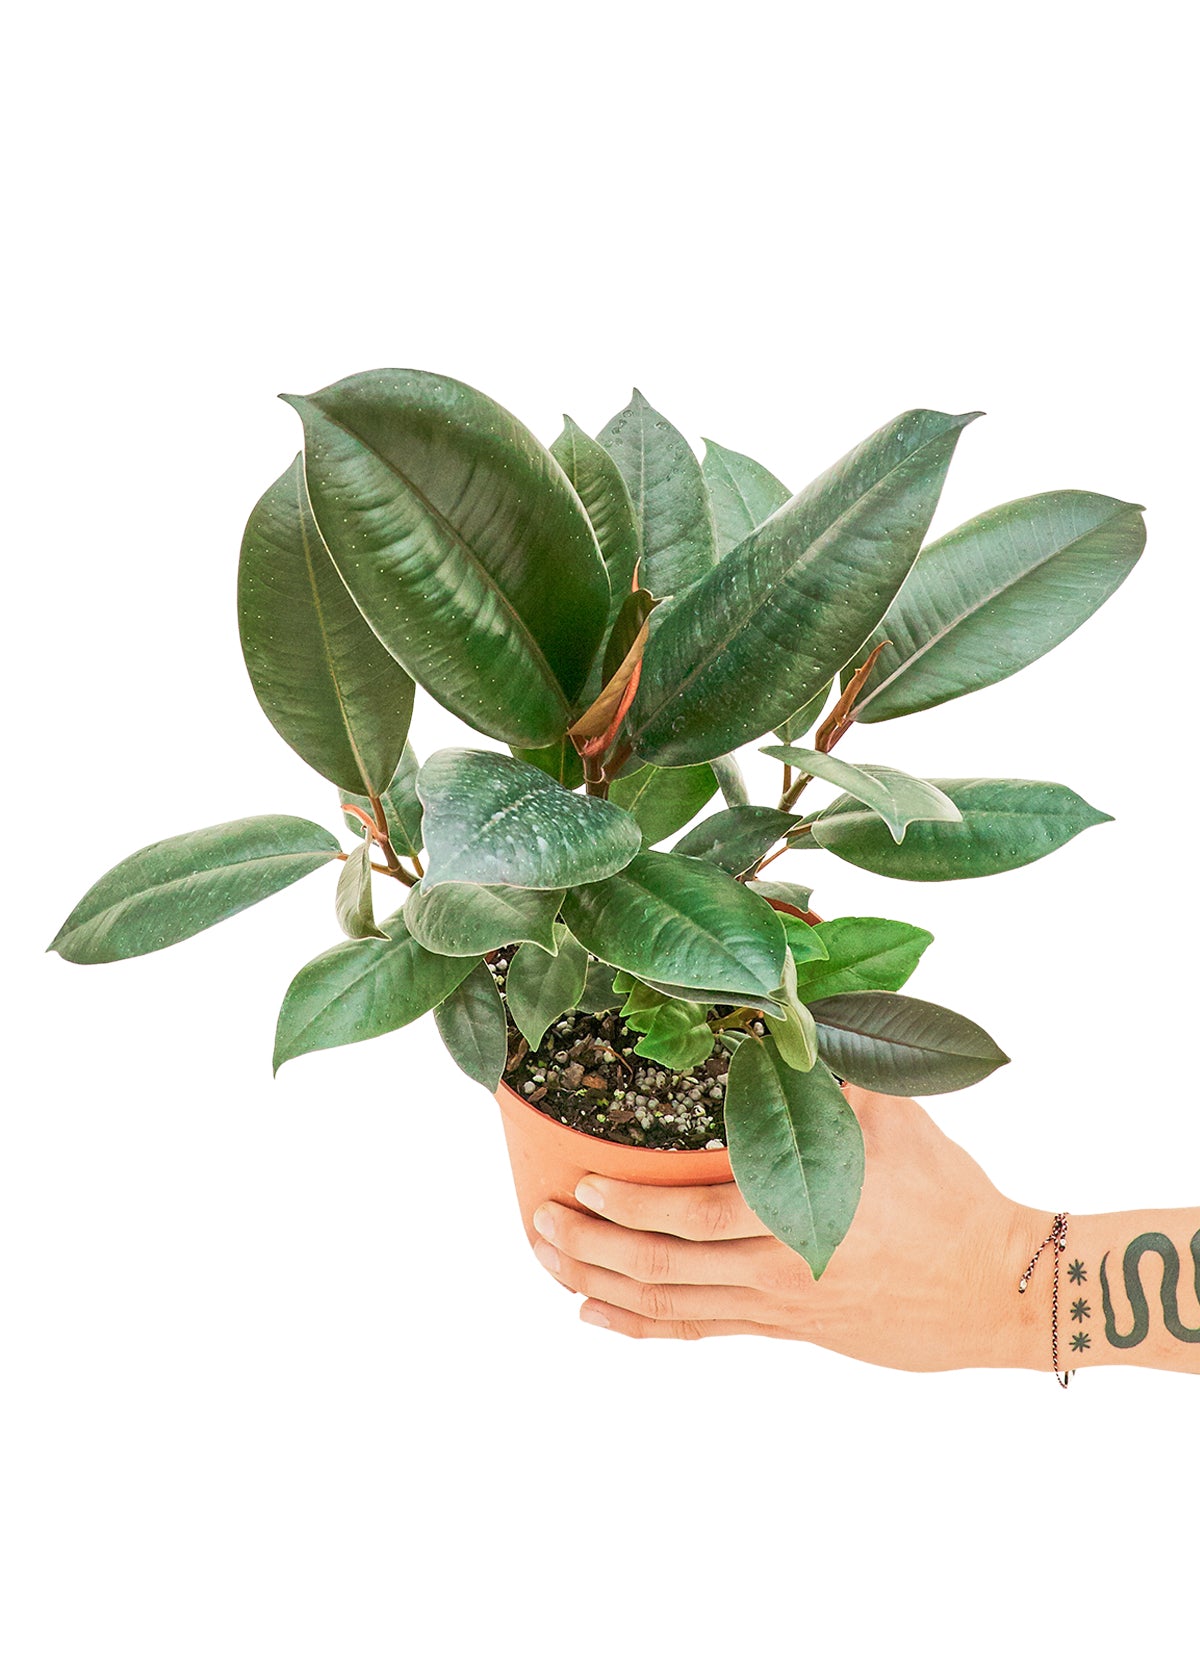 Medium sized Burgundy Rubber Tree Plant in a growers pot with a white background with a hand holding the pot showing the top view